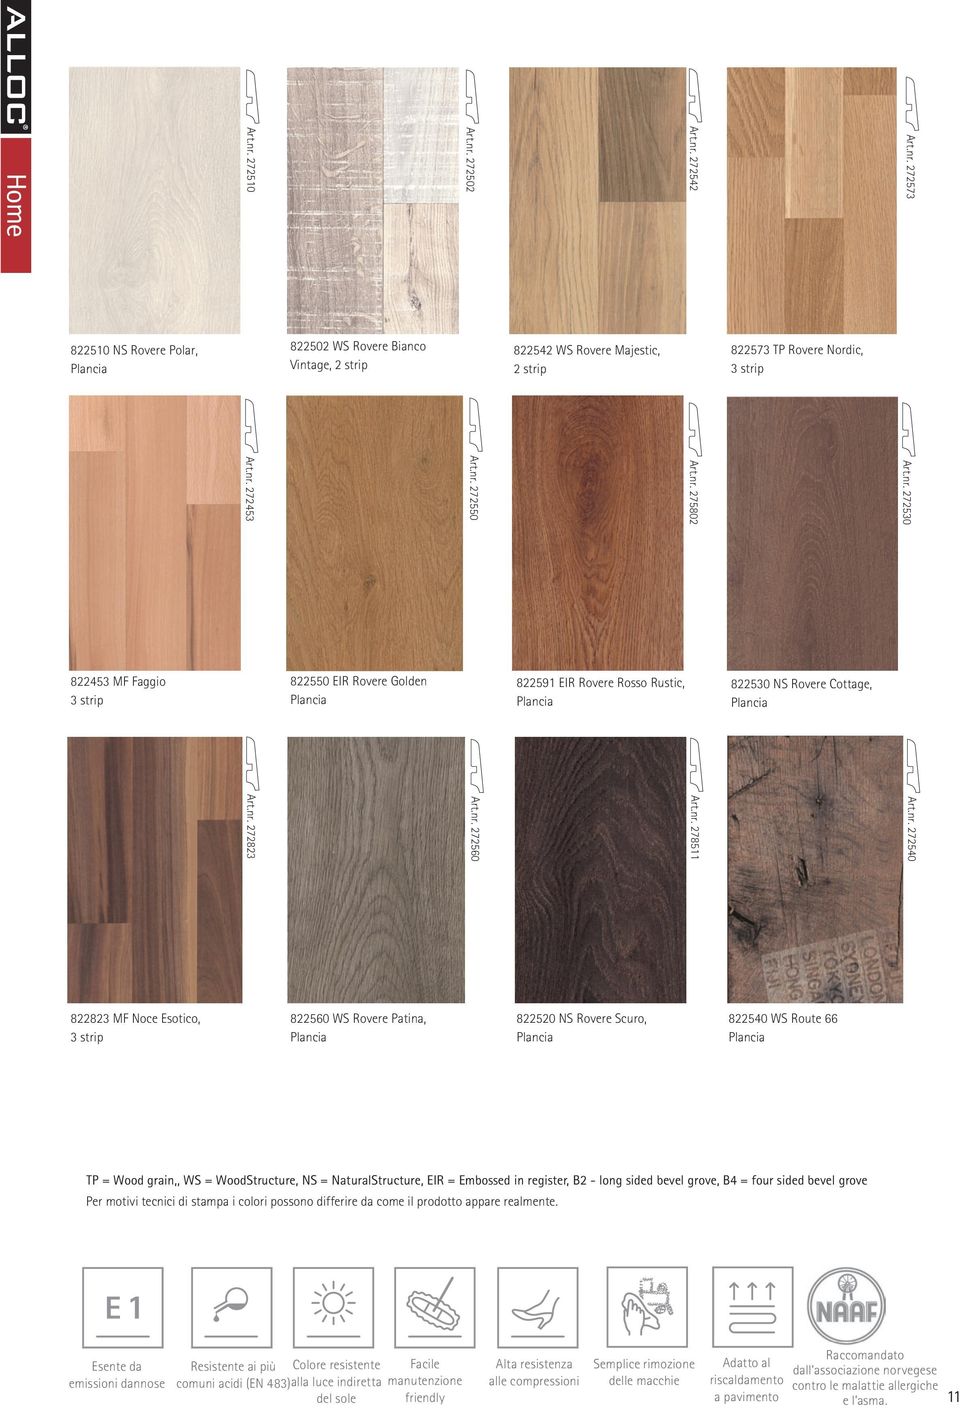 Patina, 822520 NS Rovere Scuro, 822540 WS Route 66 TP = Wood grain,, WS = WoodStructure, NS = NaturalStructure, EIR = Embossed in register, B2 - long sided bevel grove, B4 = four sided bevel grove